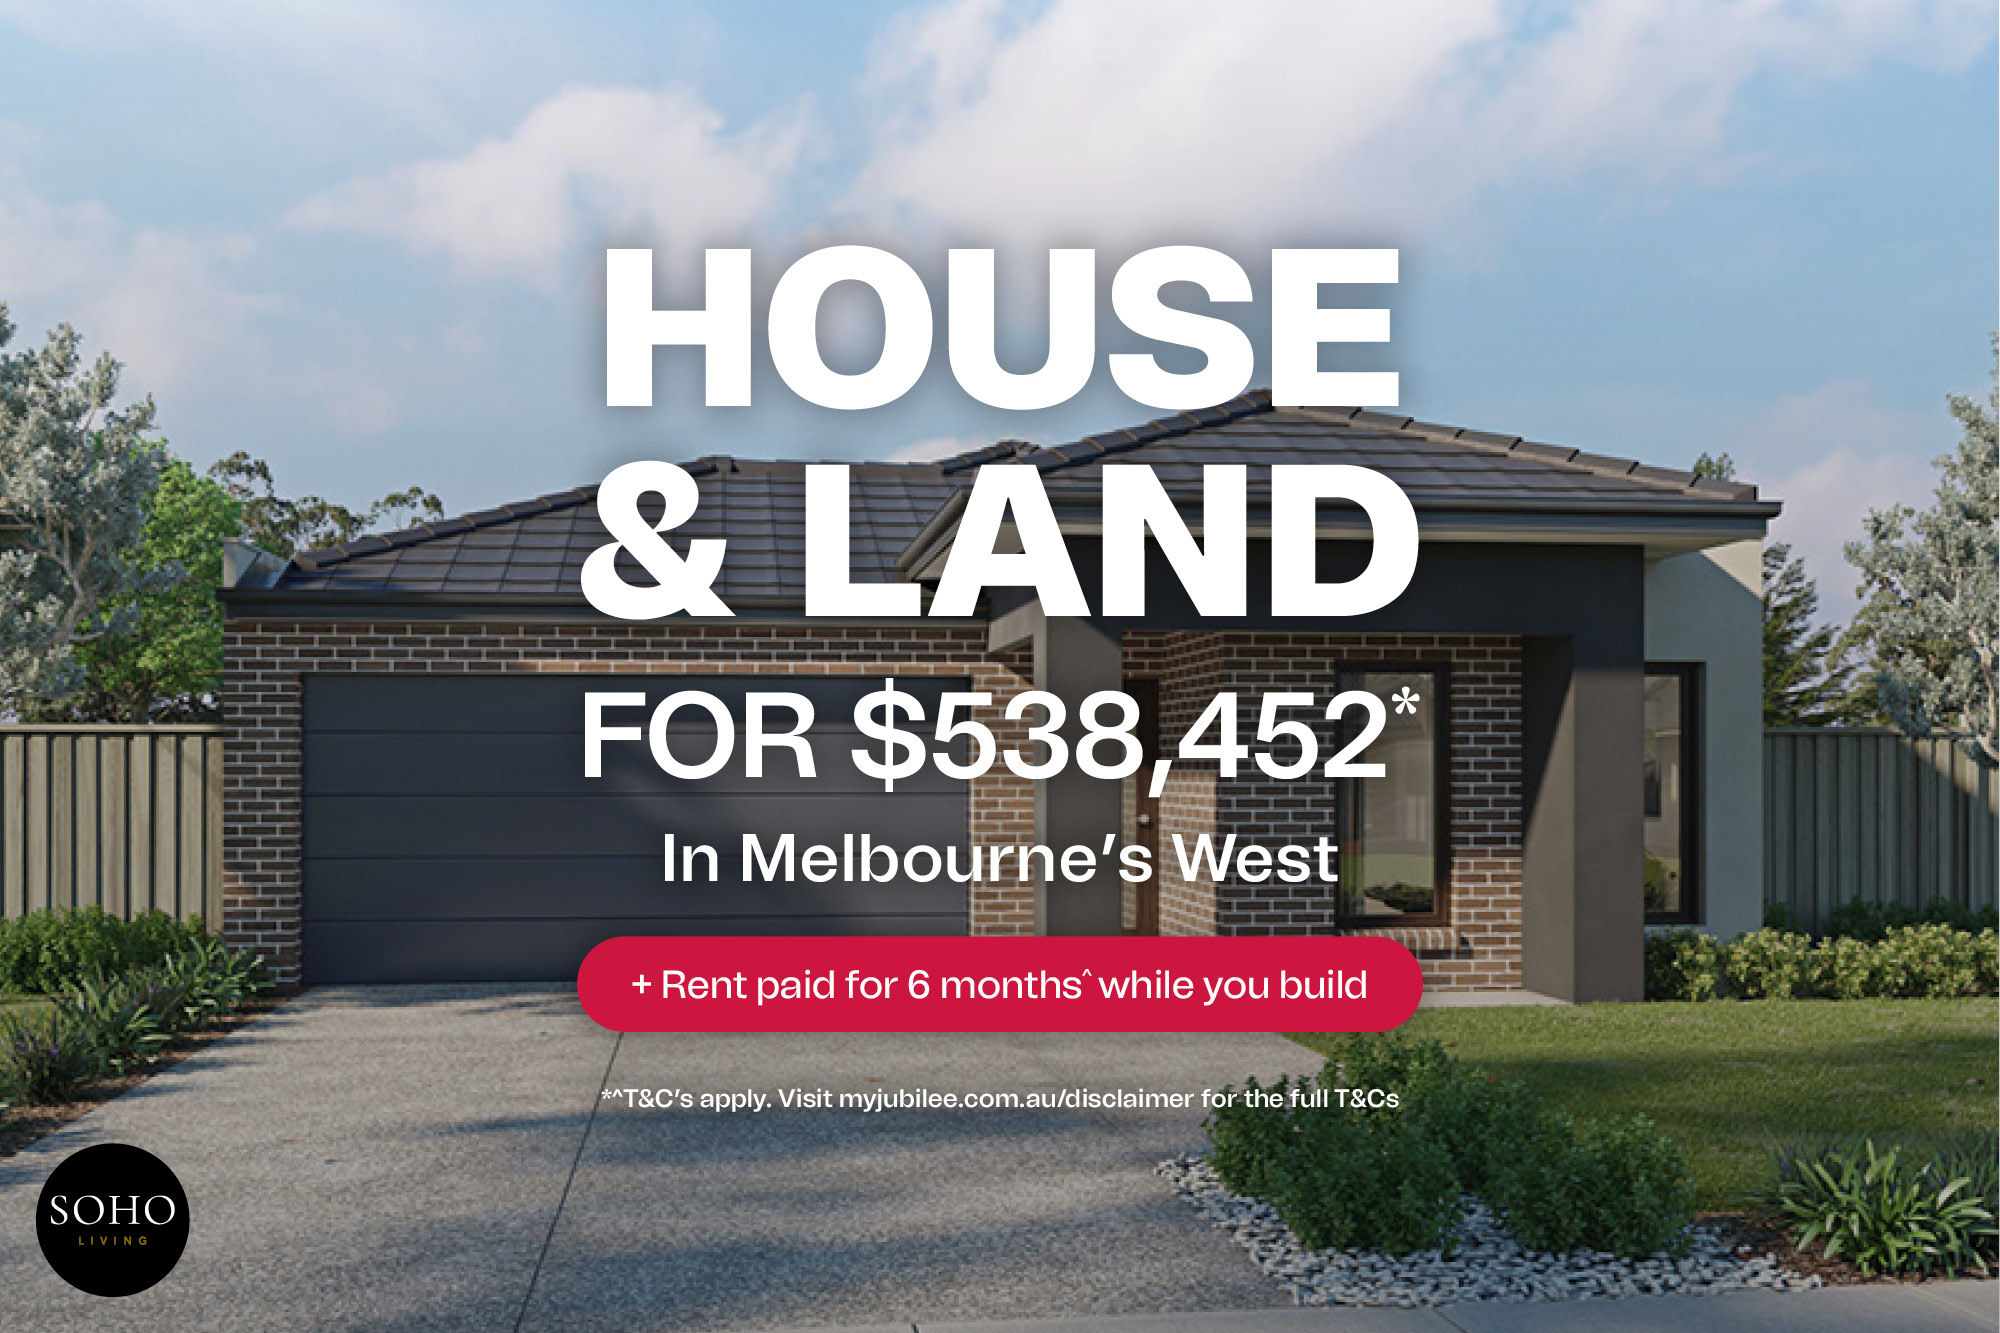 <span class="font-bold">House & Land for $538,452* </span><br>in Melbourne's West